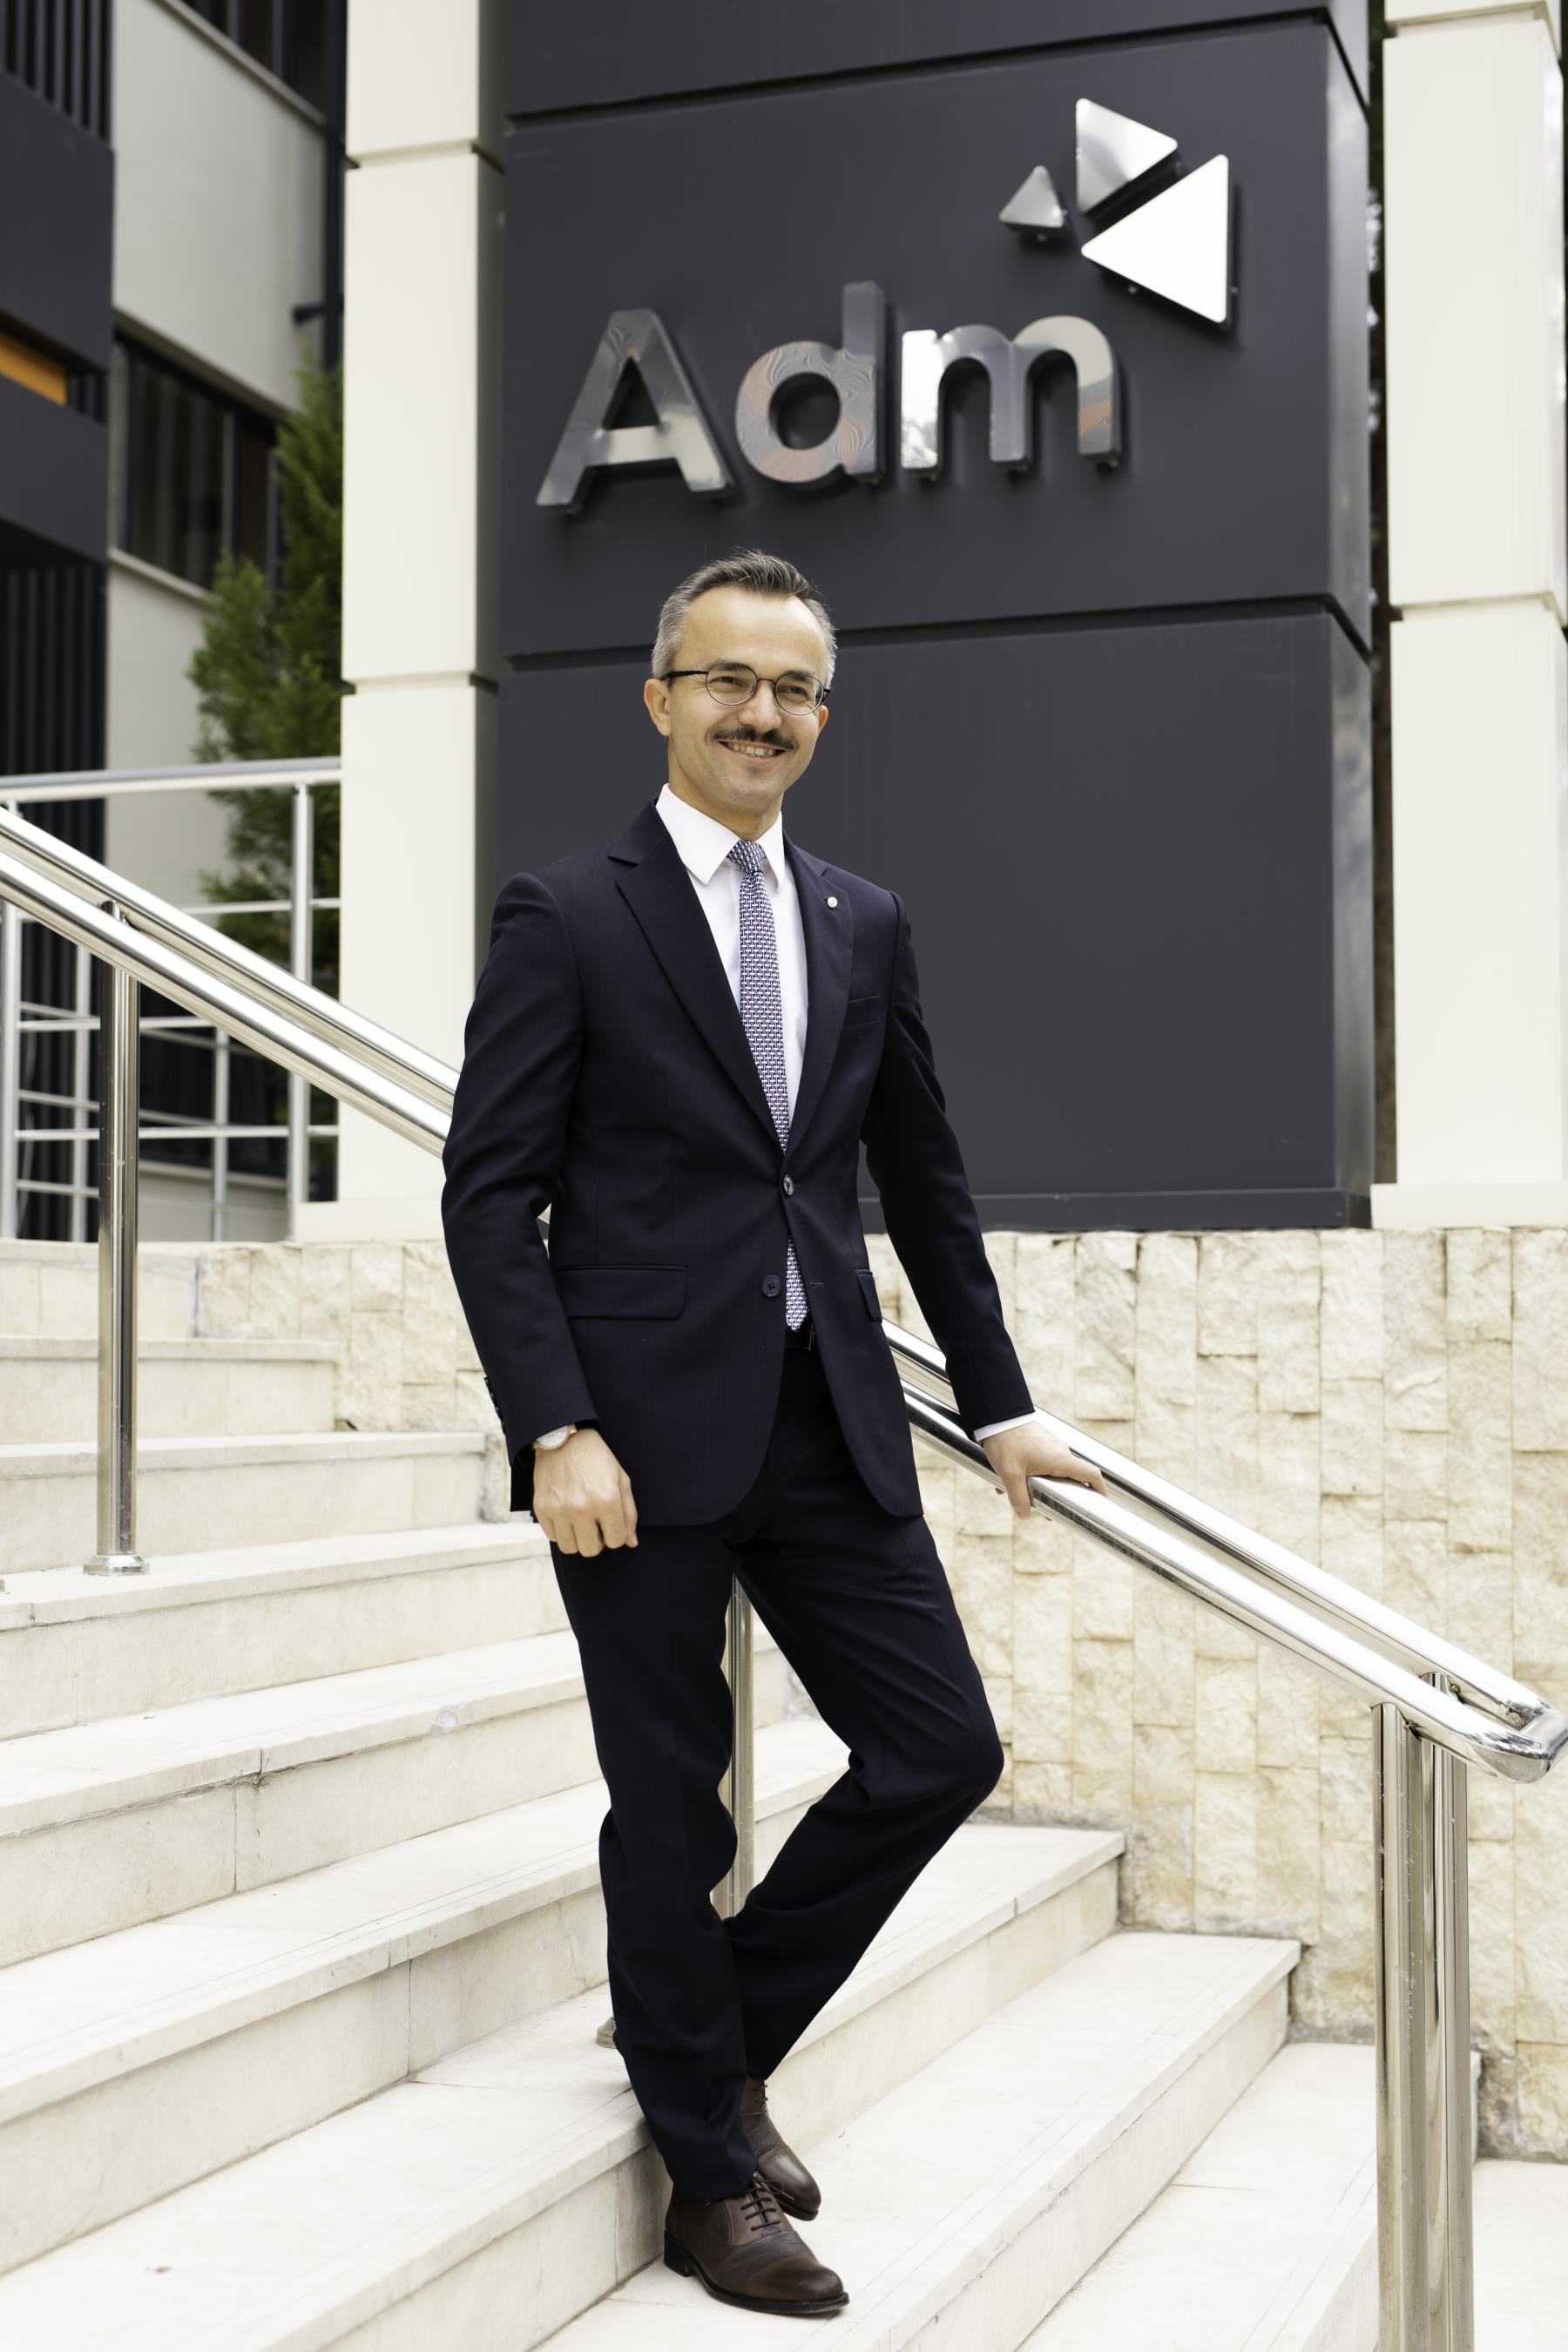 ADM General Manager